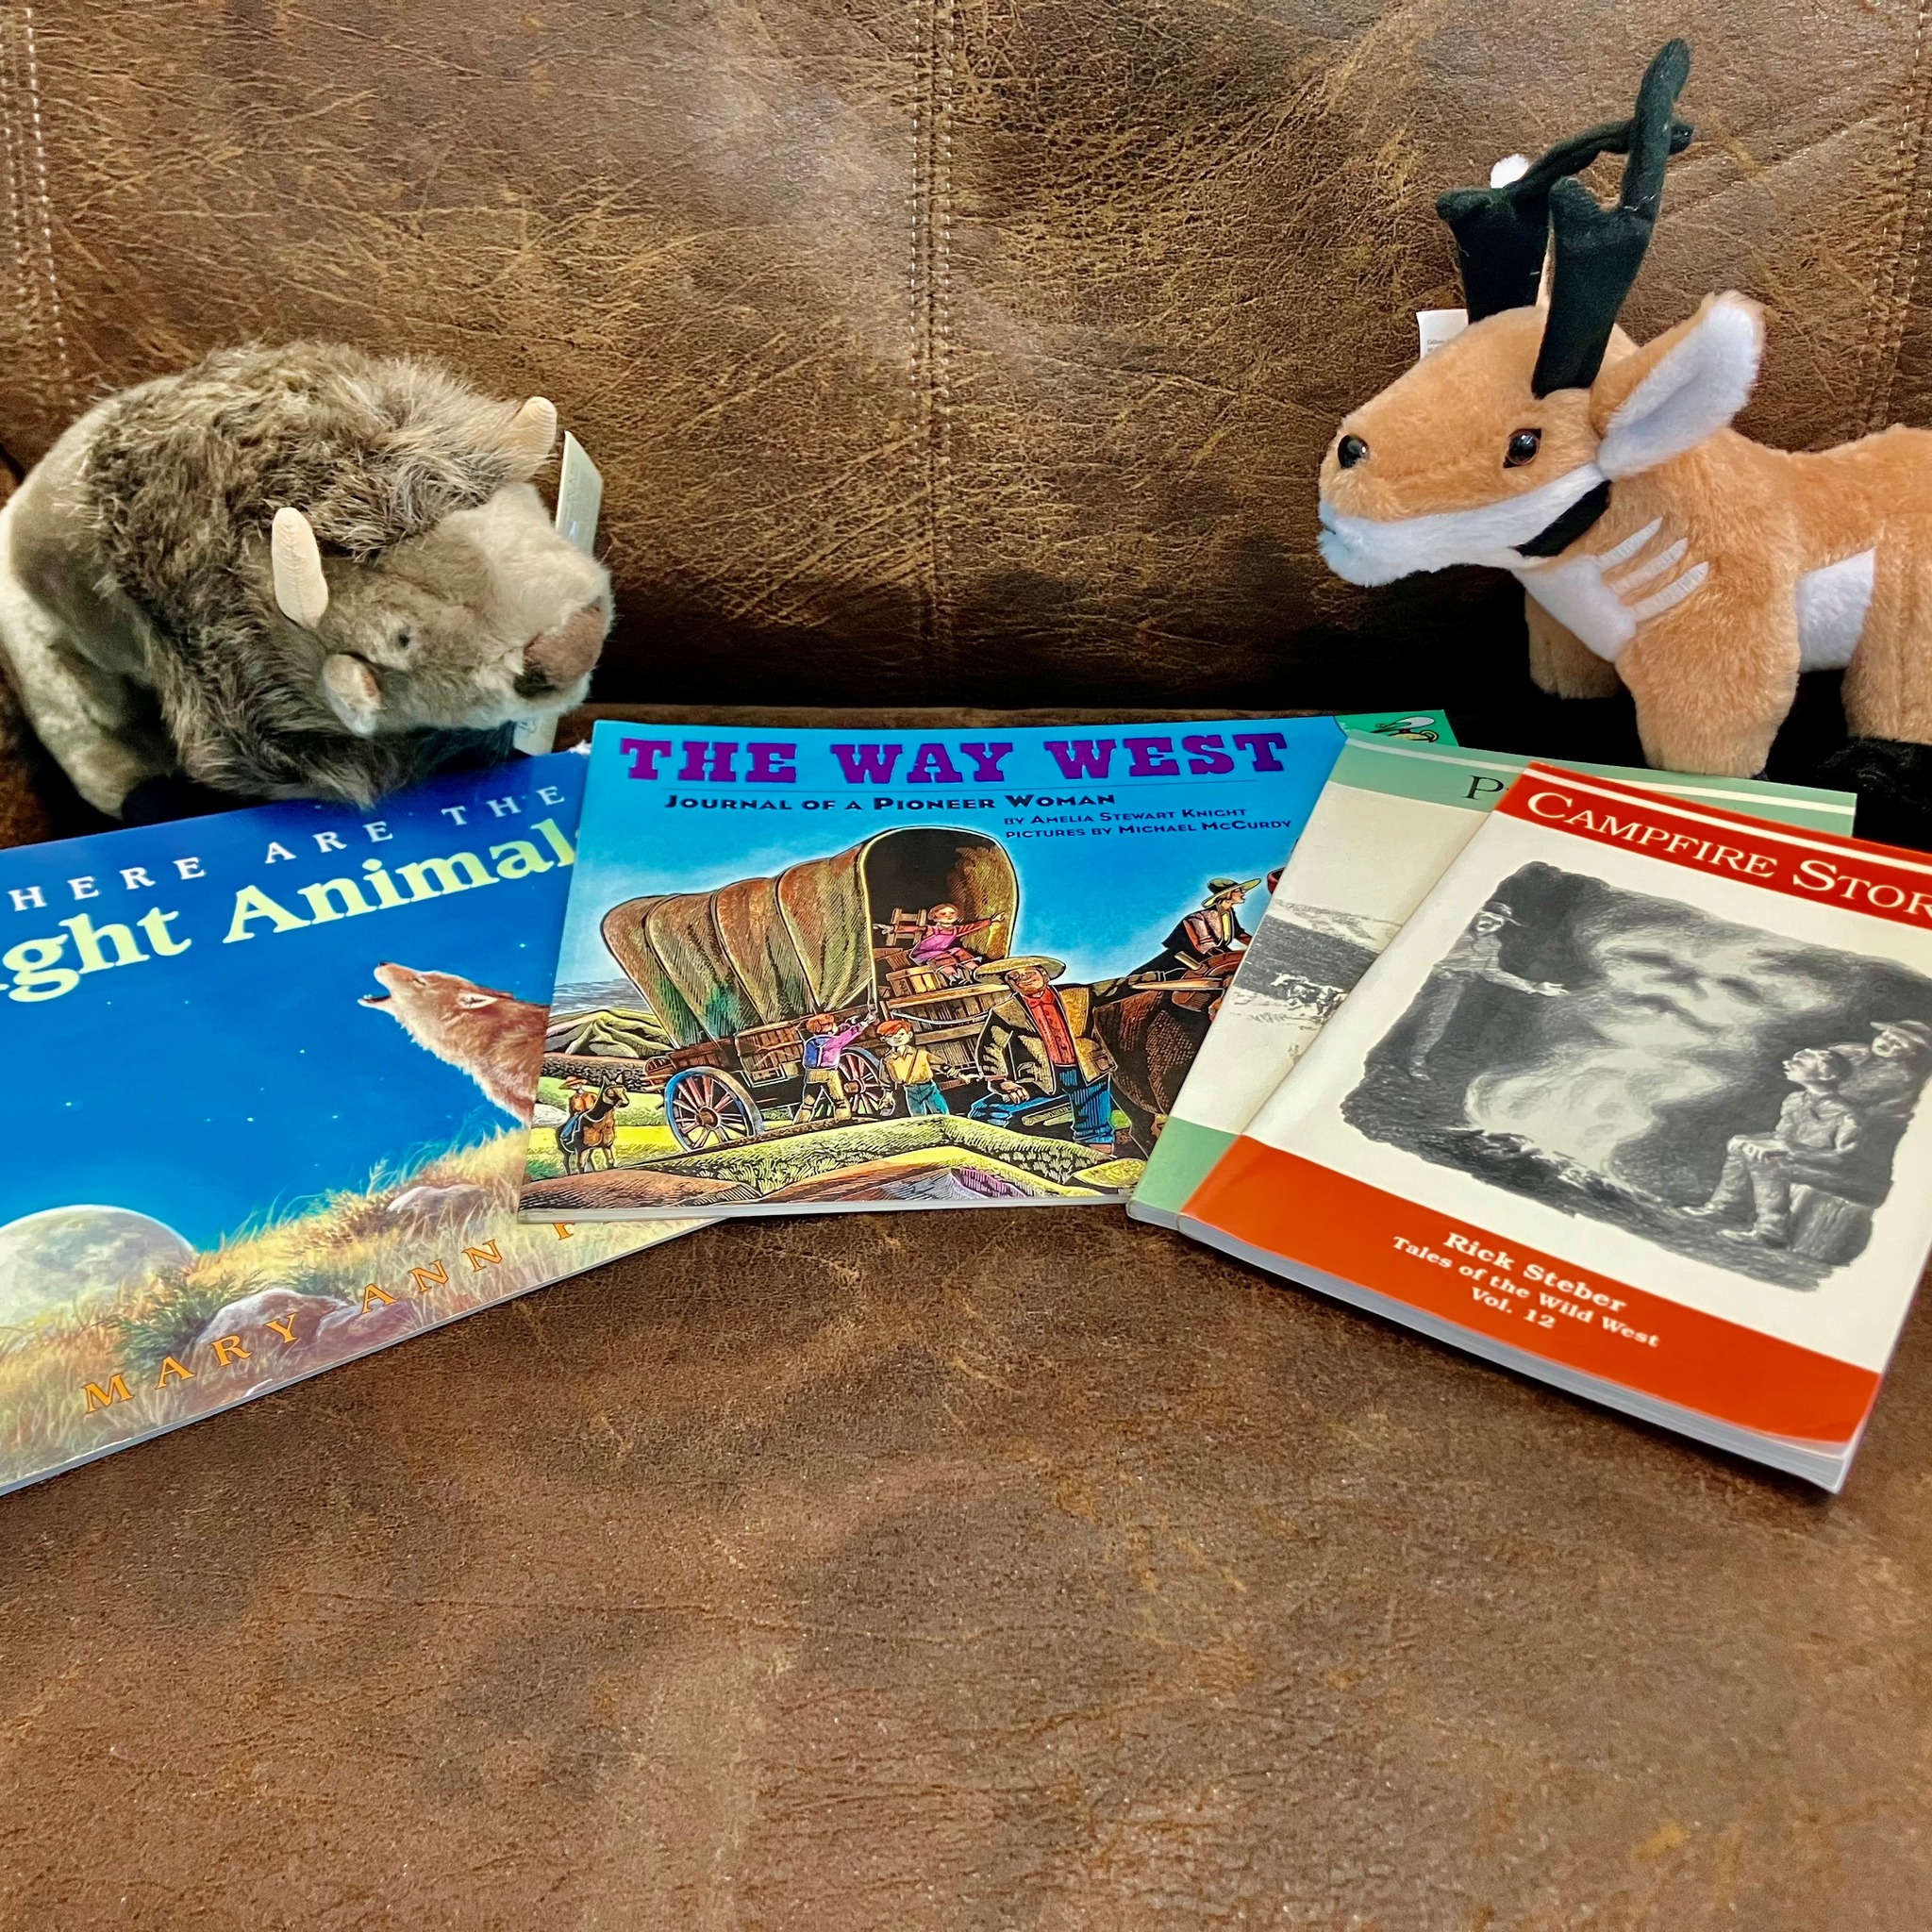 Image of two stuffed animals next to a pile of books on a couch